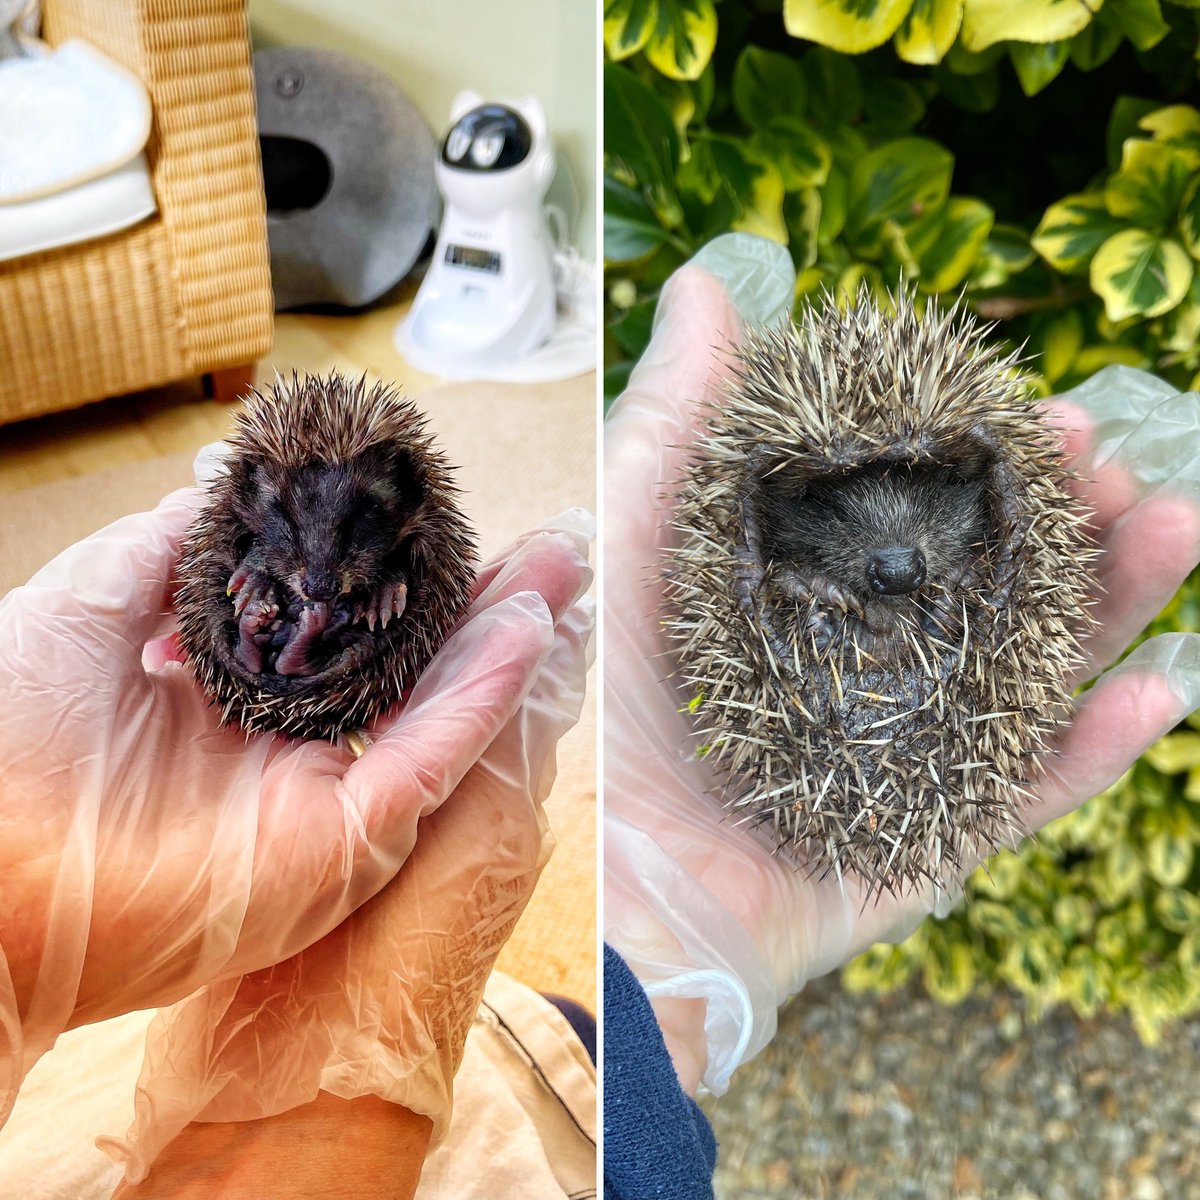 In just a week Muffin has increased her bodyweight by over 50% & has transformed from a hoglet into a perfect miniature #hedgehog #wildlife #hedgehogs